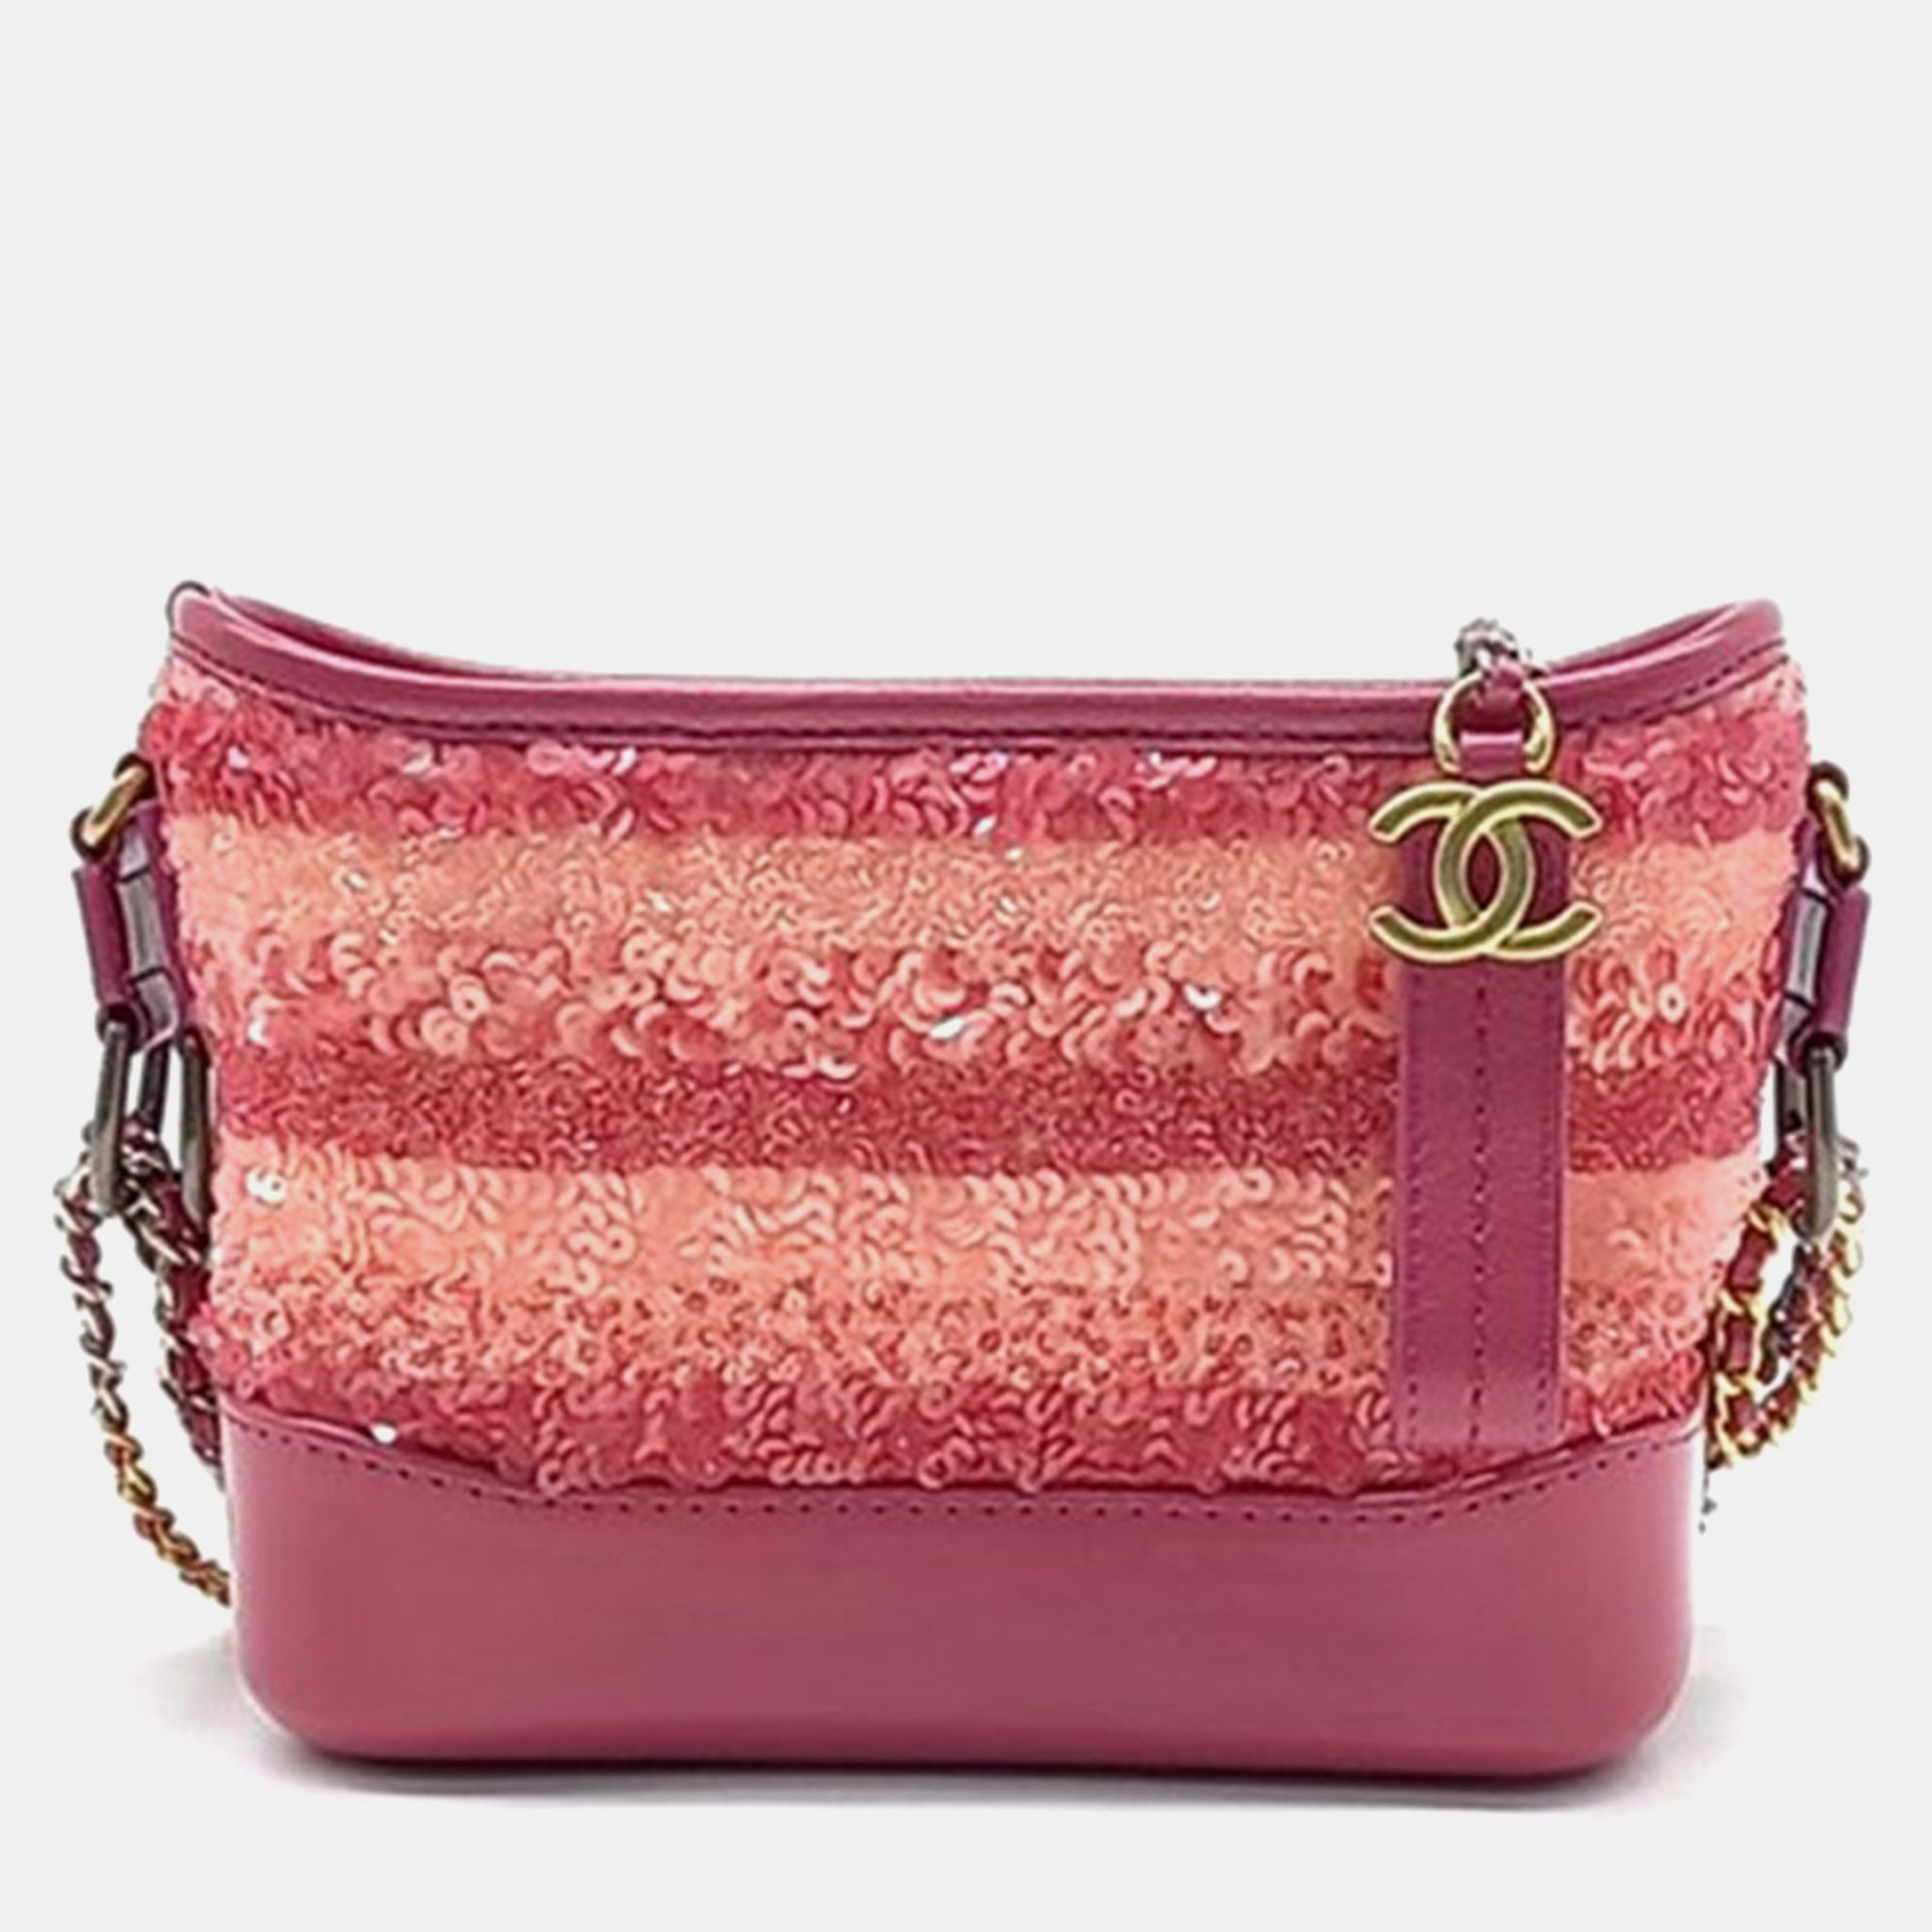 Chanel pink sequin small gabrielle hobo bag